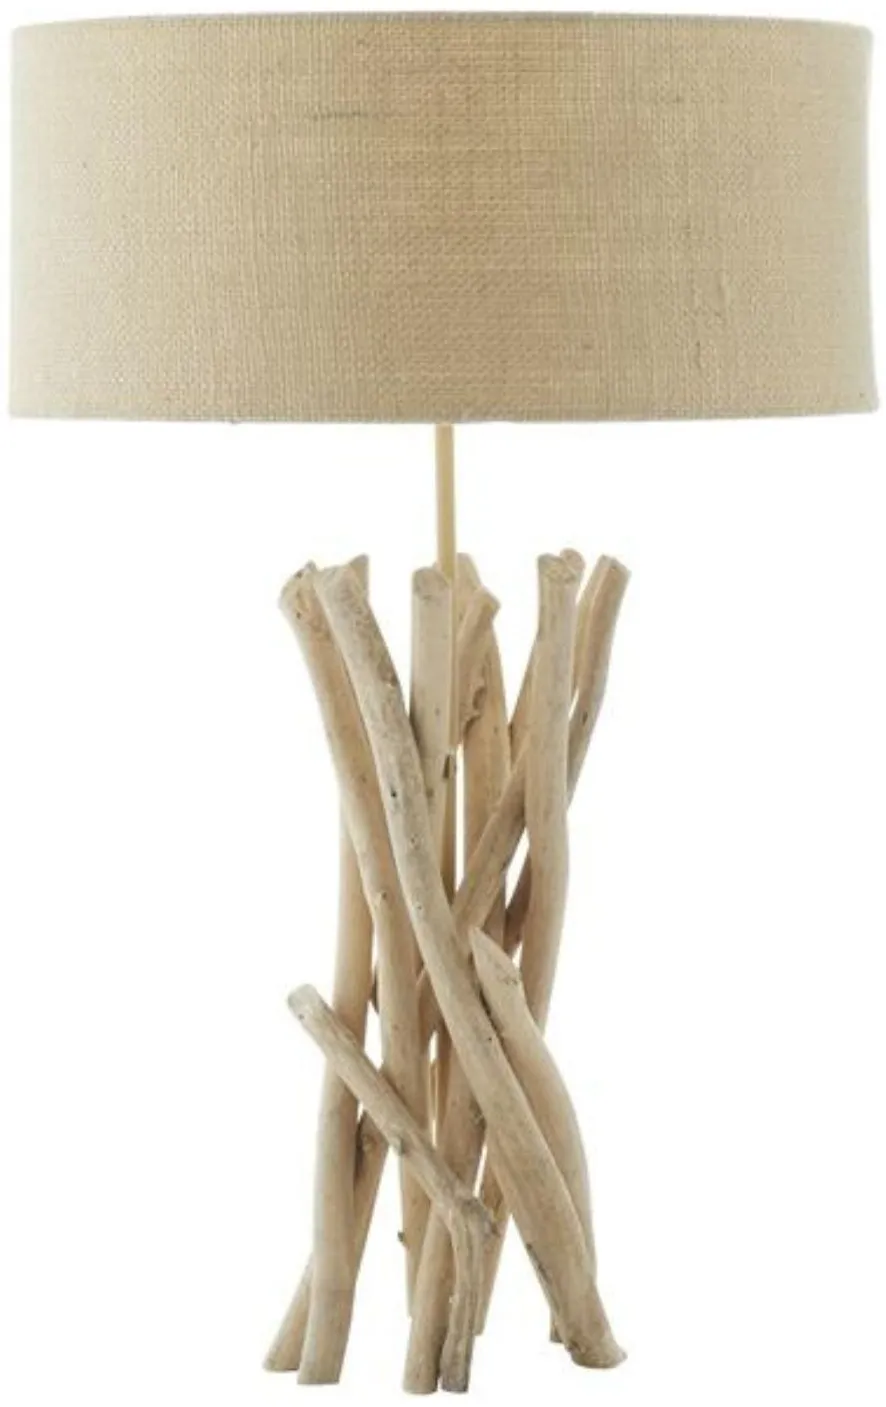 Driftwood and Metal Table Lamp 24"H